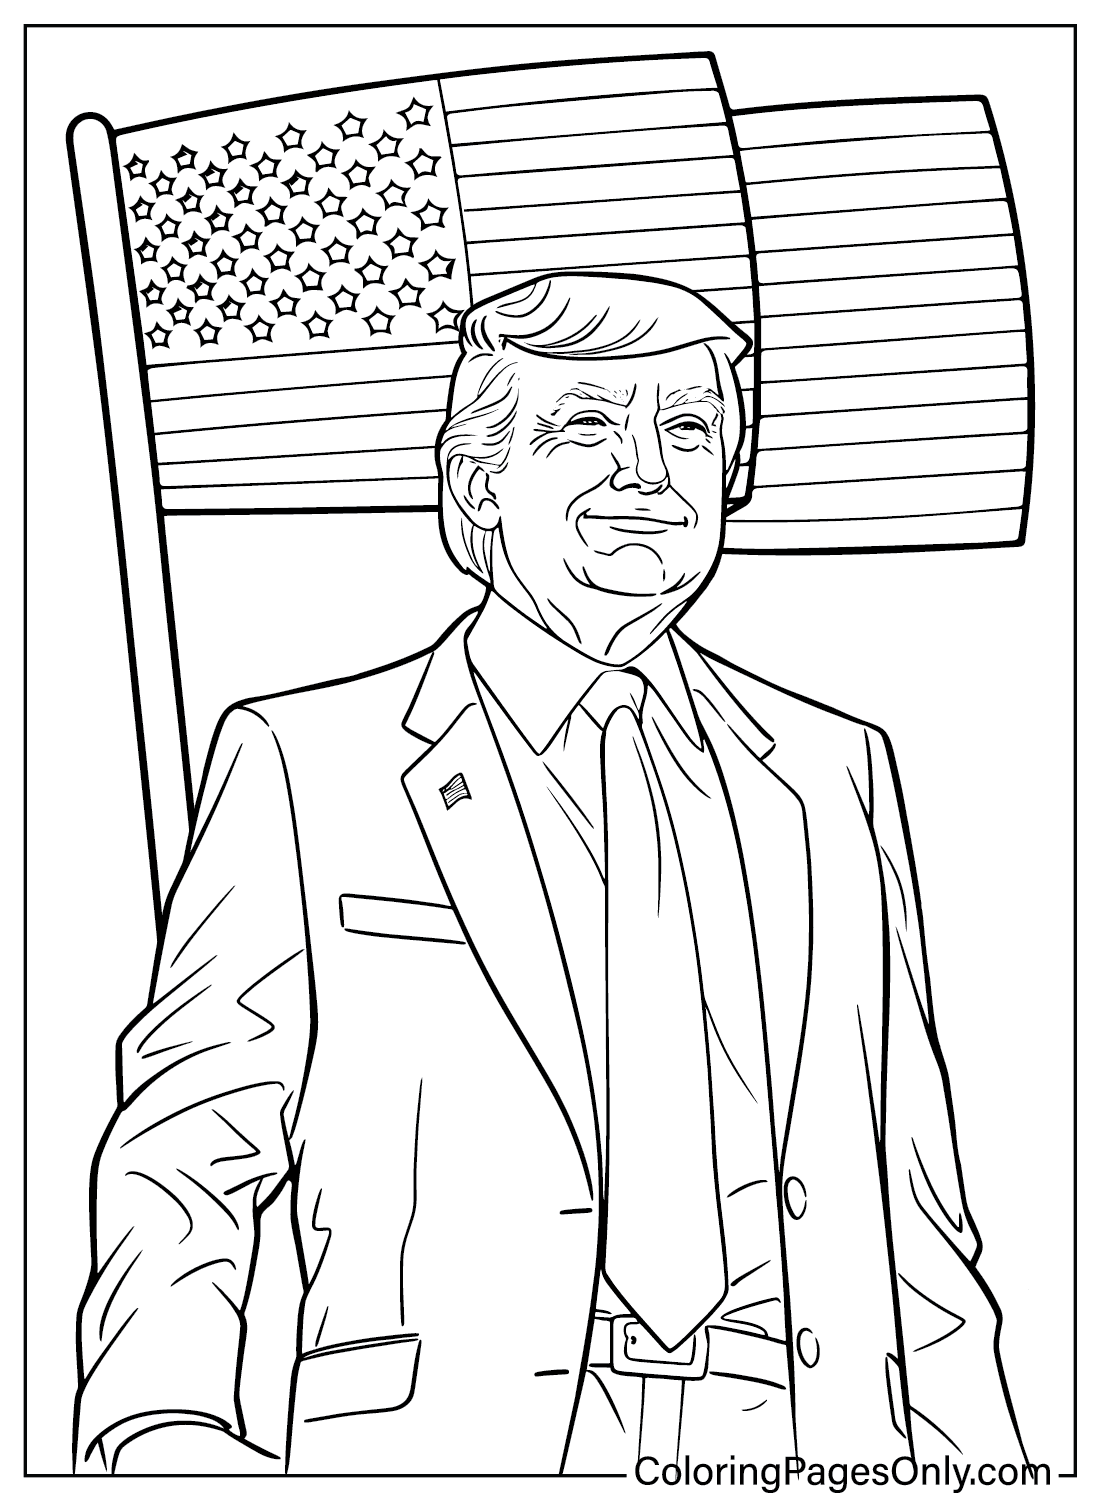 Donald Trump Coloring Sheet for Kids from Donald Trump